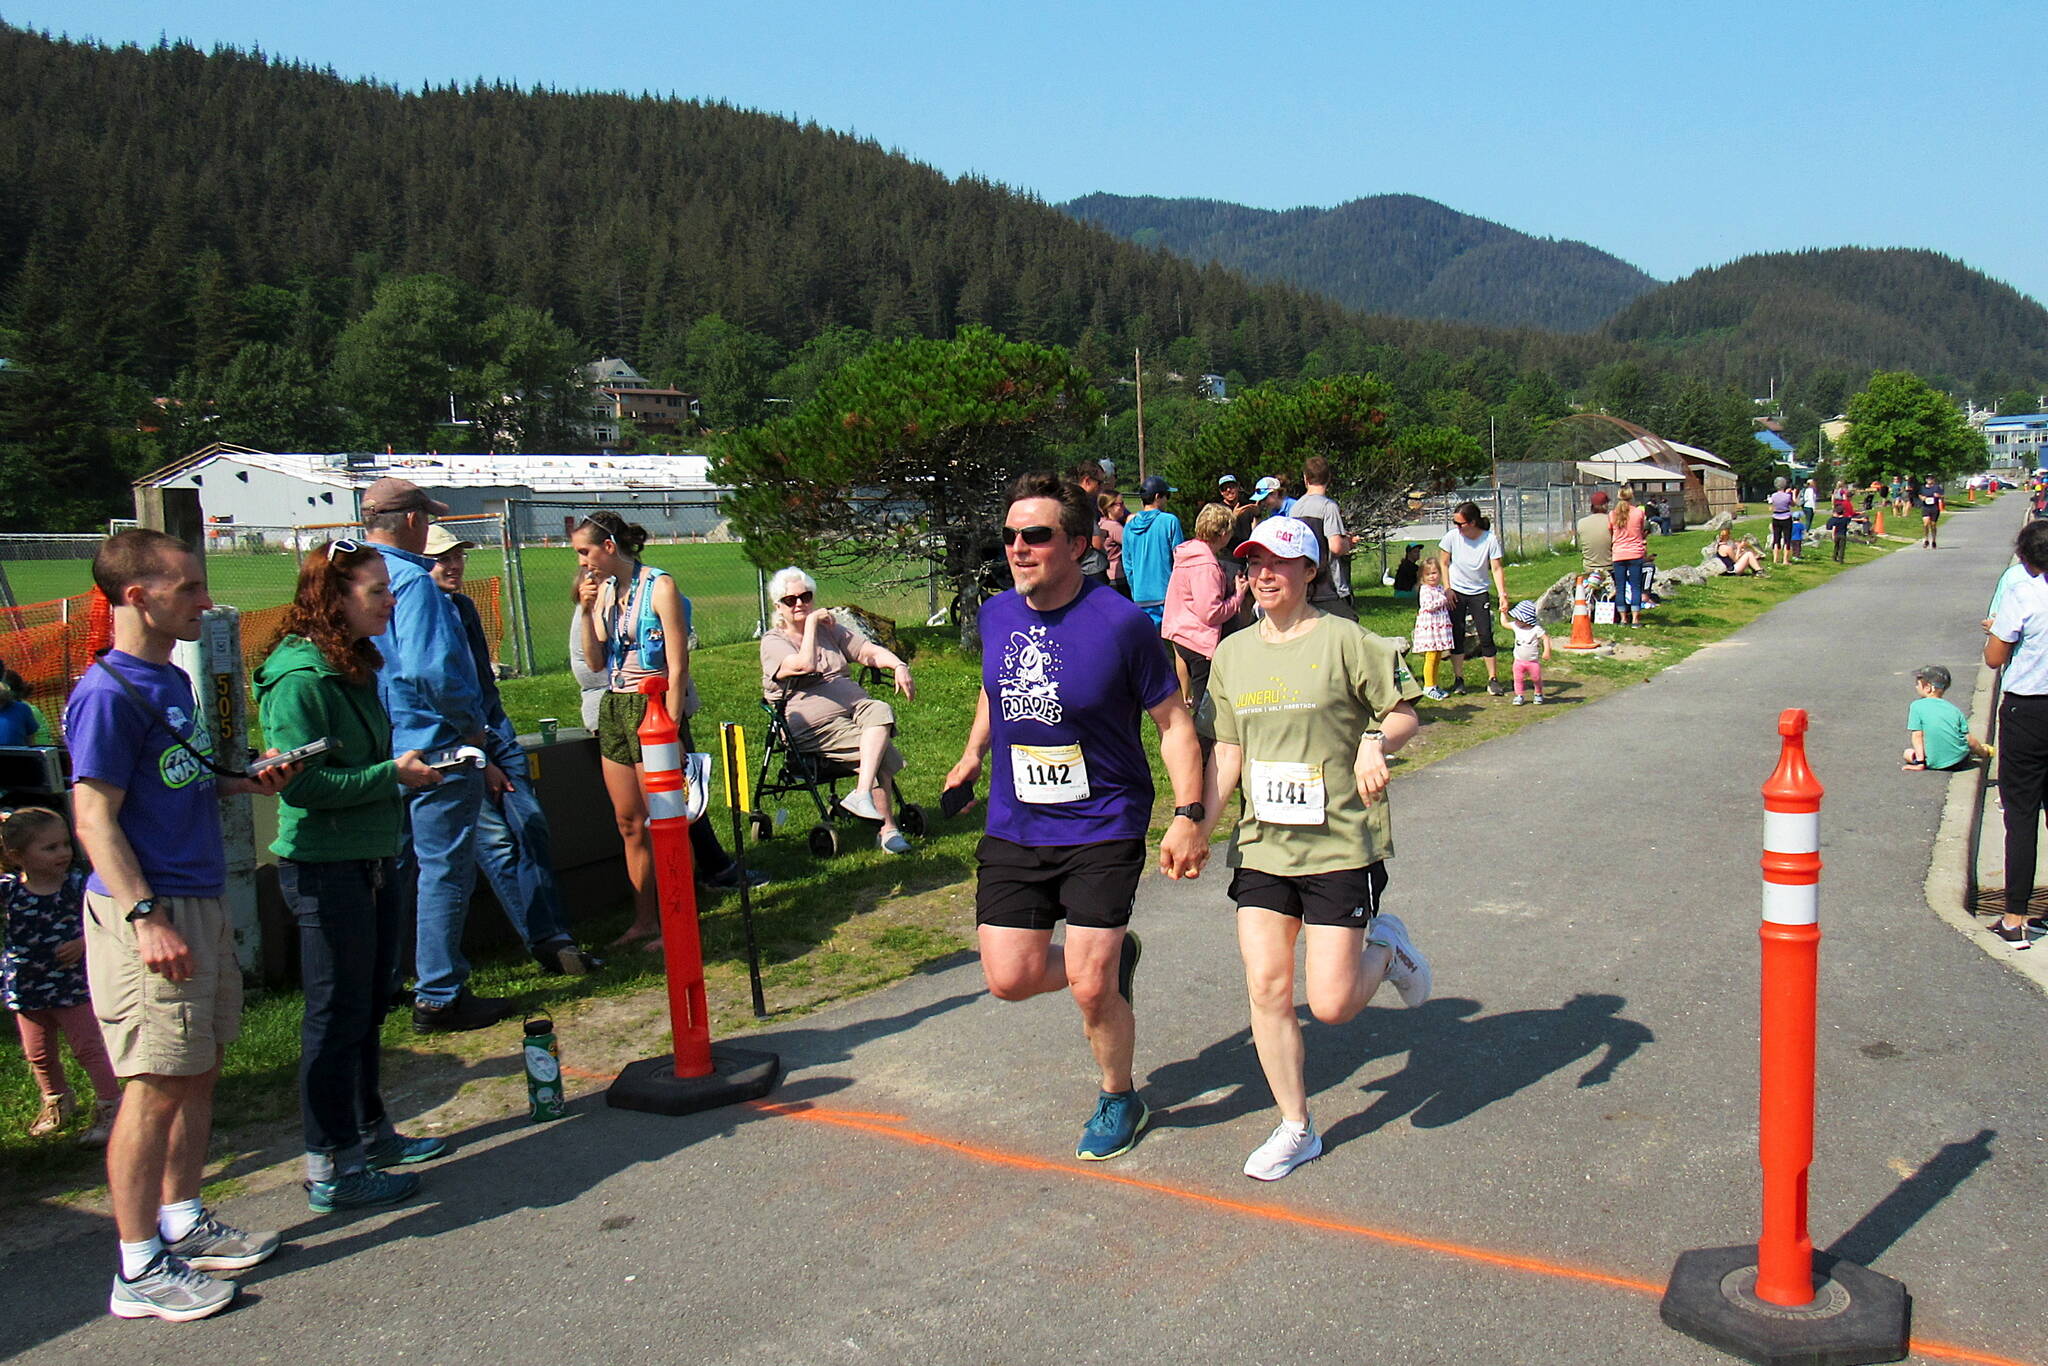 Samuel and Justine Carlisle, a couple from Asheville, North Carolina, cross the finish line of the Juneau Half Marathon on Saturday at Savikko Park. Organizers of the event, which includes full and half marathons, estimate about half of the participants are from outside Juneau because it is considered a "destination" race. (Photo courtesy of Juneau Trail and Road Runners)